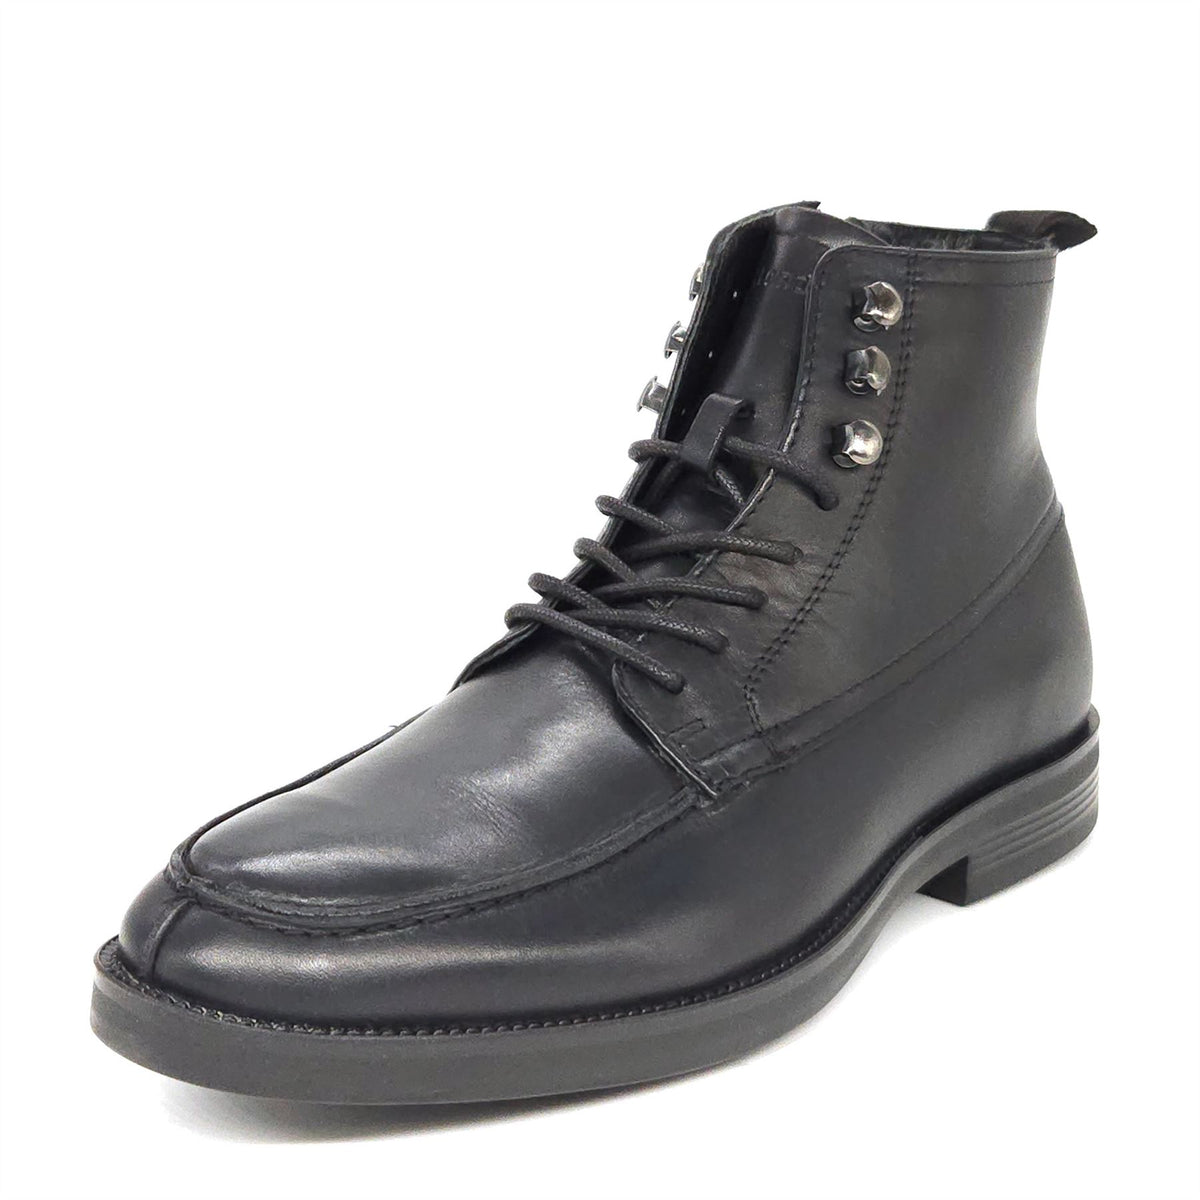 HX London Ealing Lace Up Leather Boots